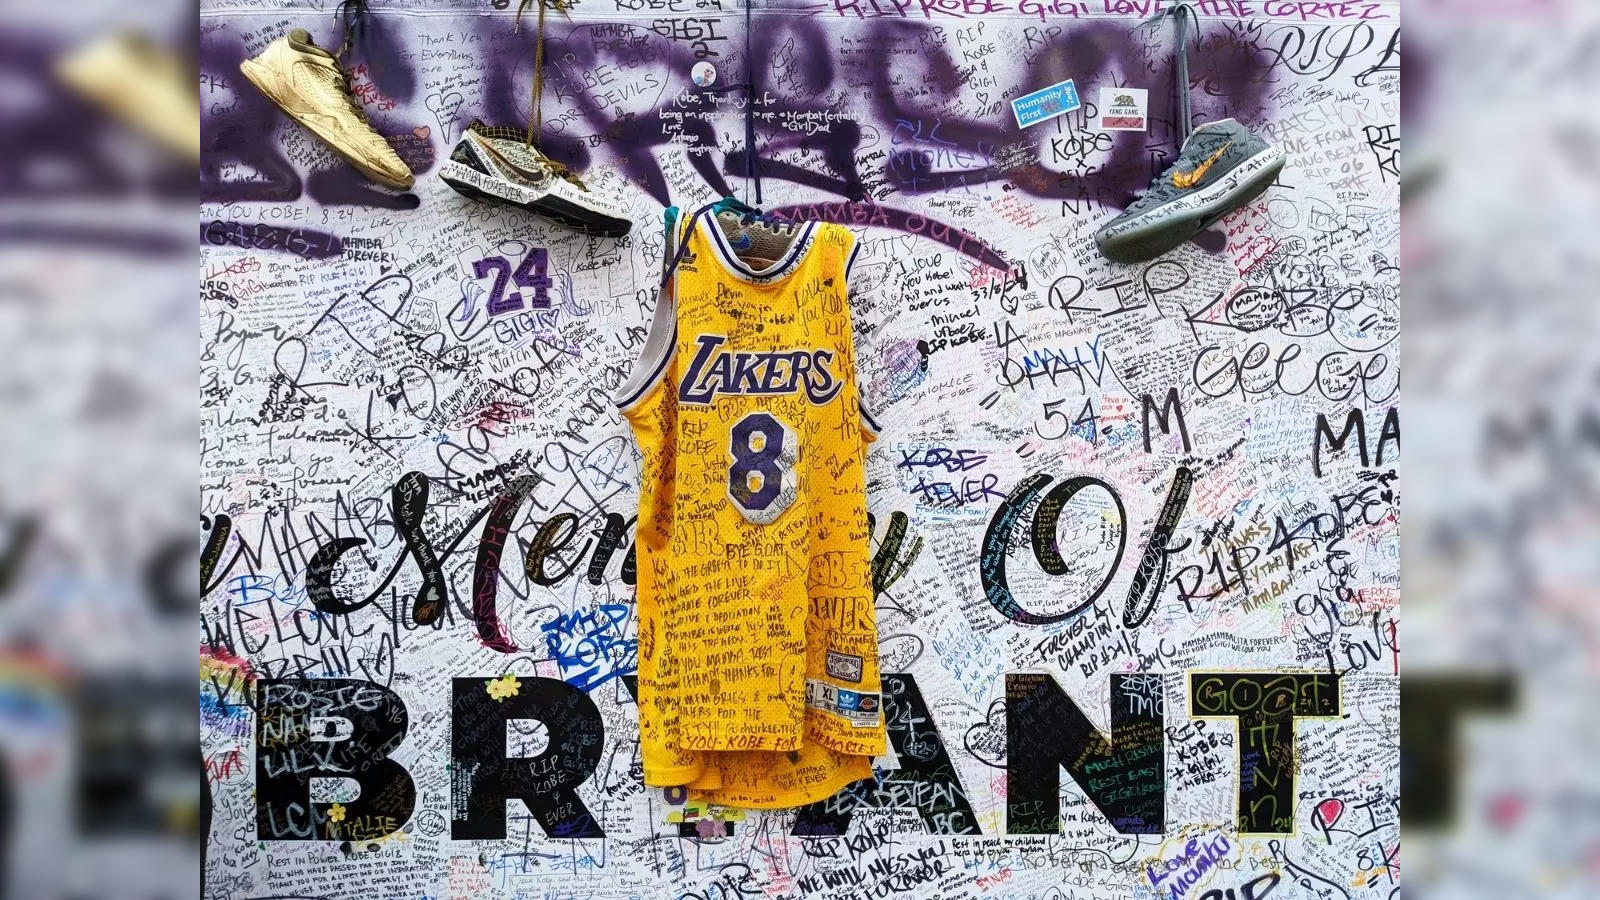 Kobe Bryant rookie jersey sells for record $3.69 million - Los Angeles Times